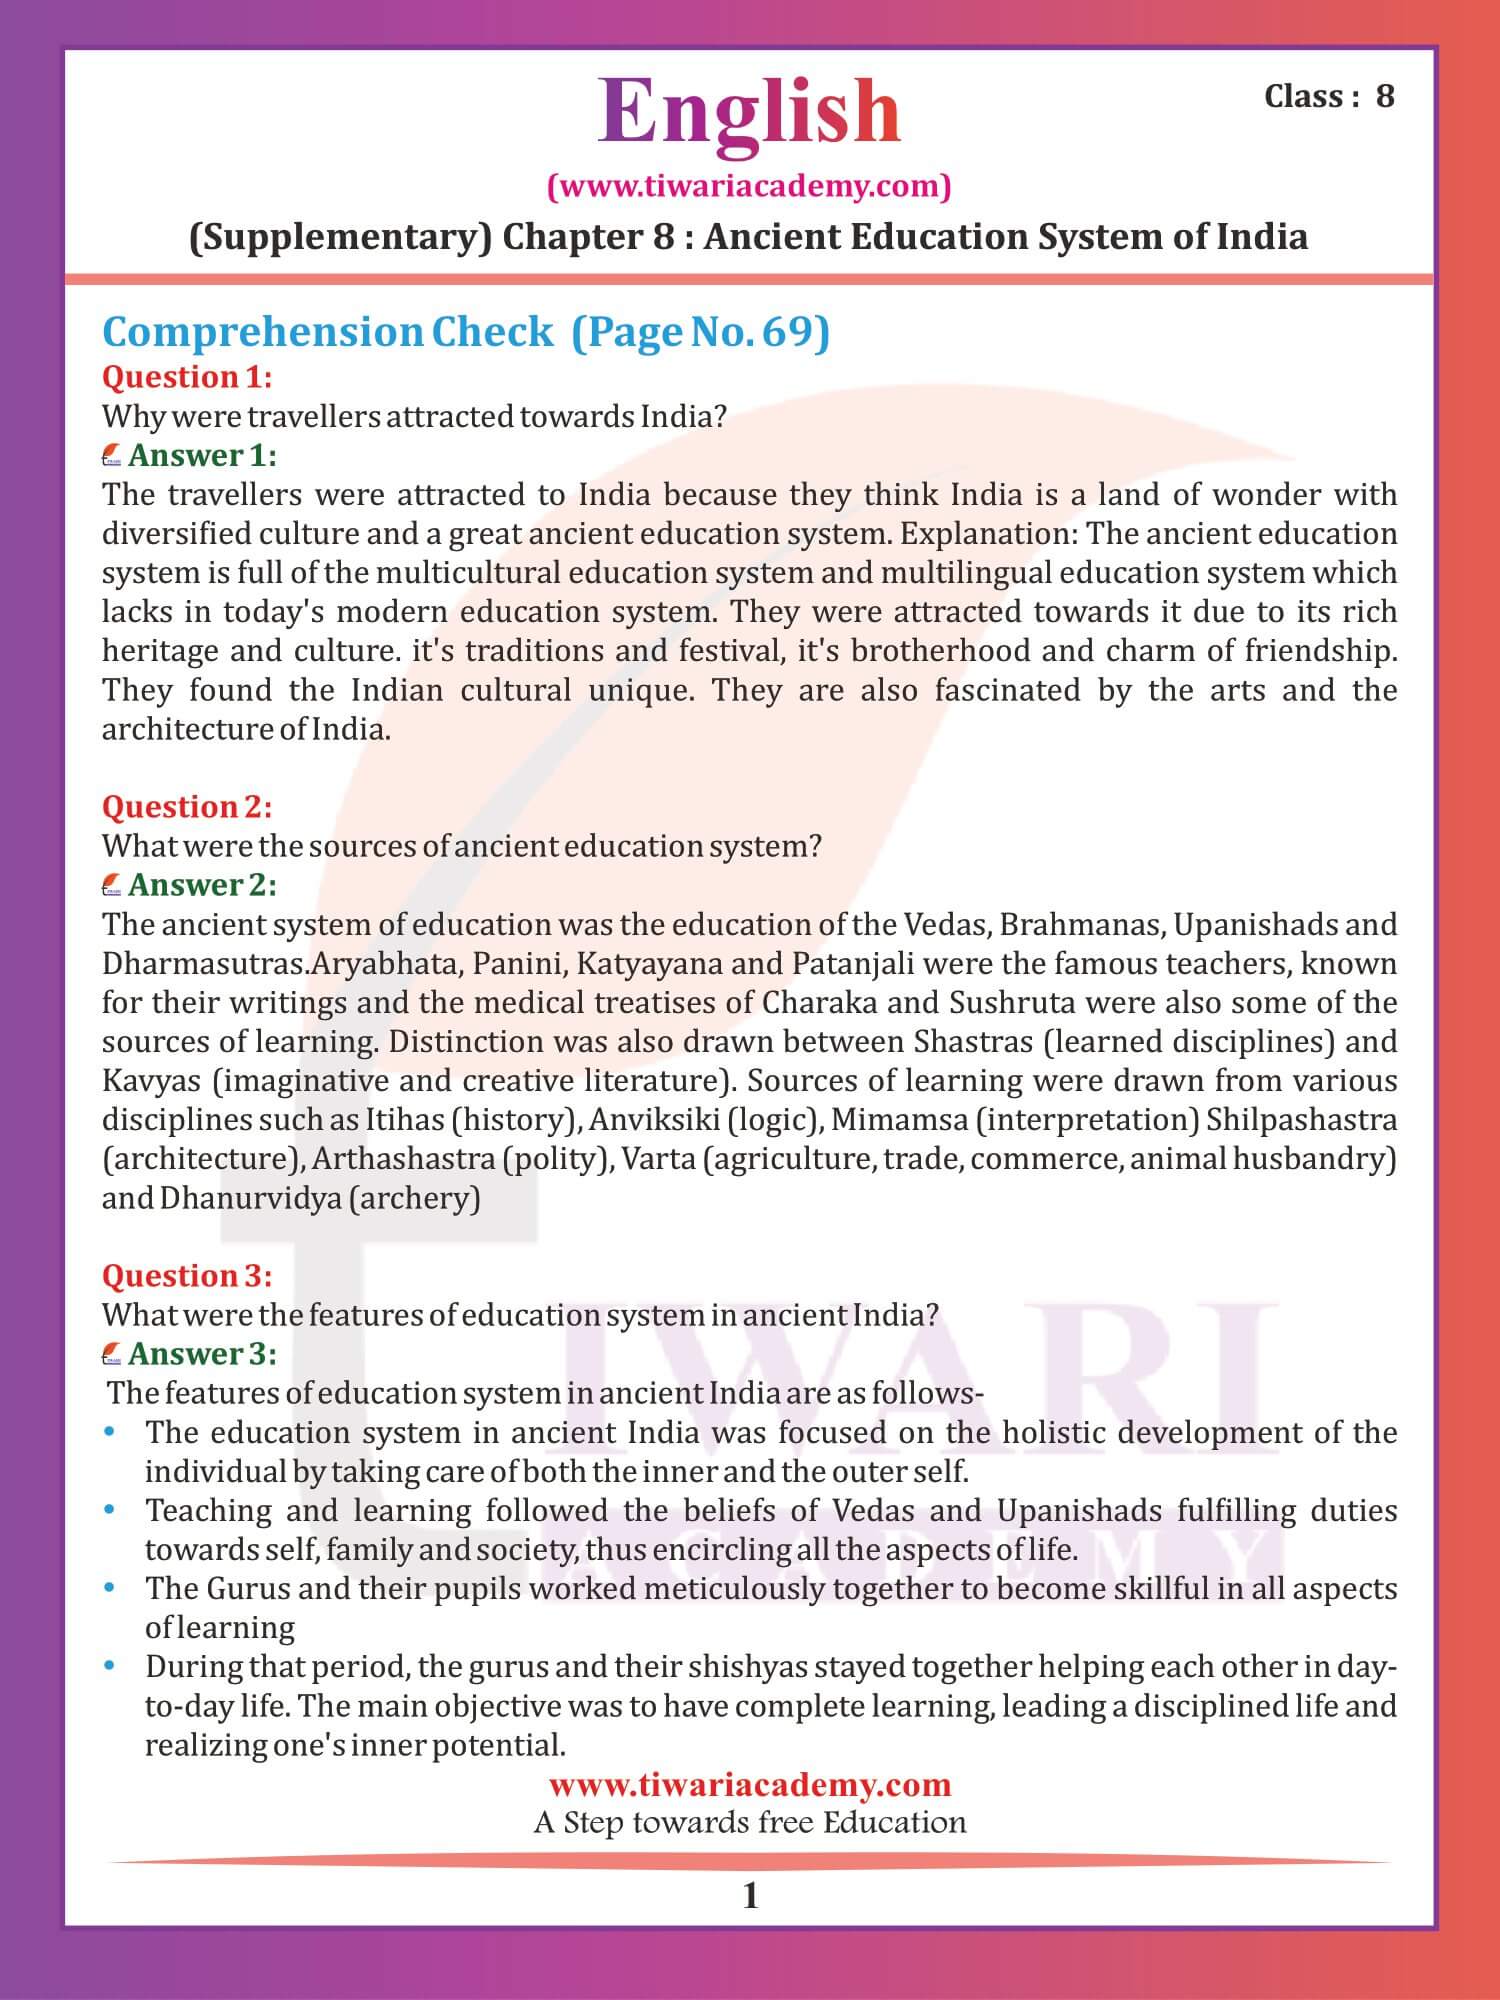 NCERT Solutions for Class 8 English Supplementary Chapter 8 Ancient Education System of India